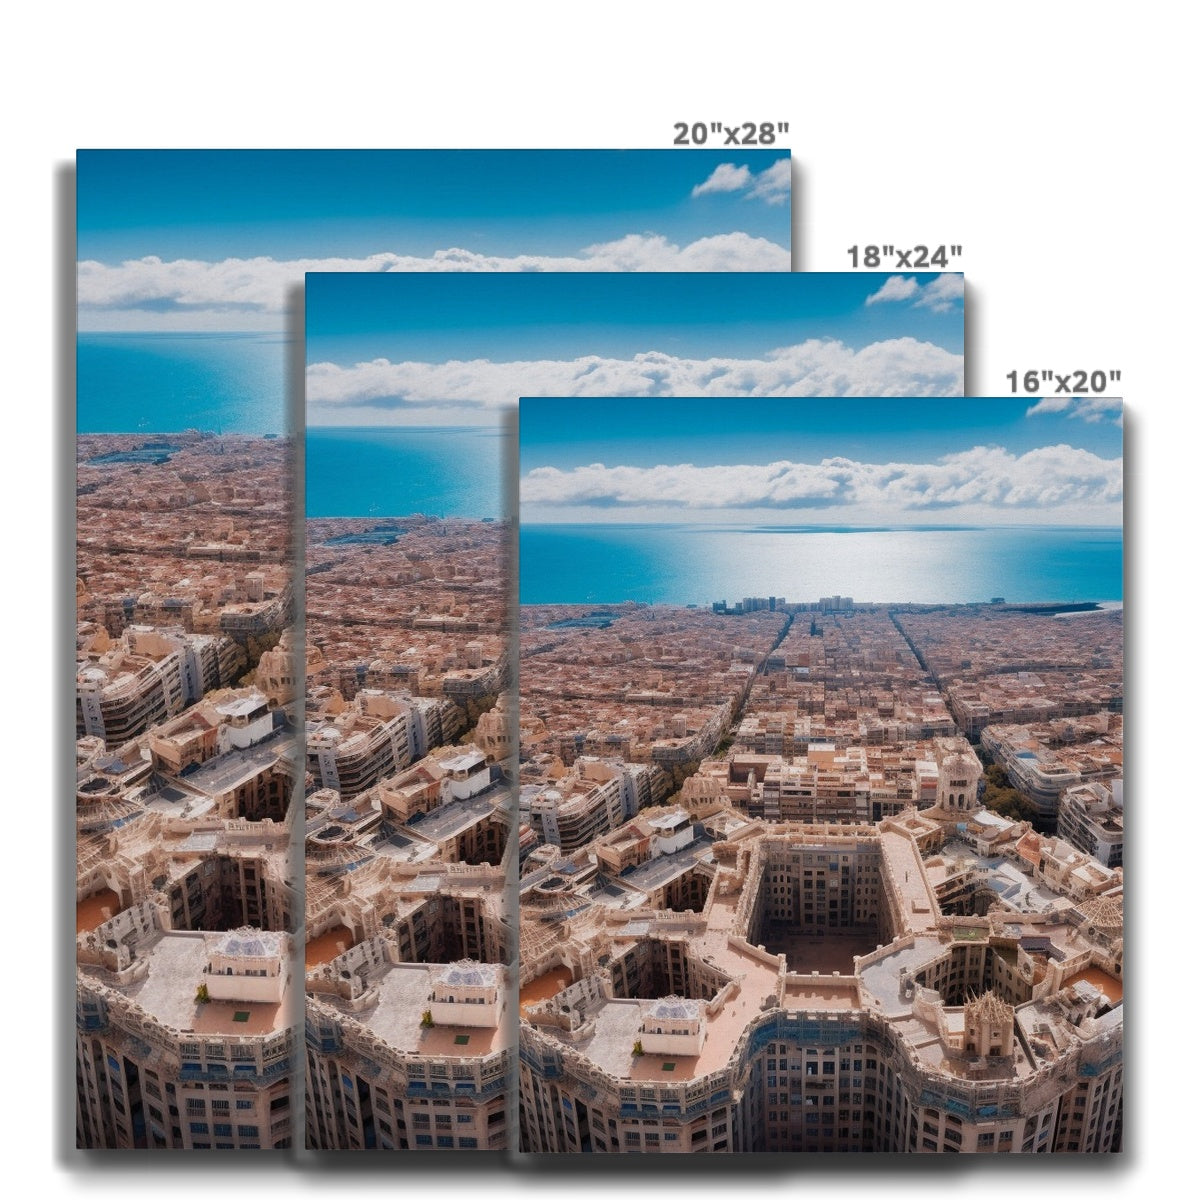 Barcelona Architecture From The Sky  Canvas